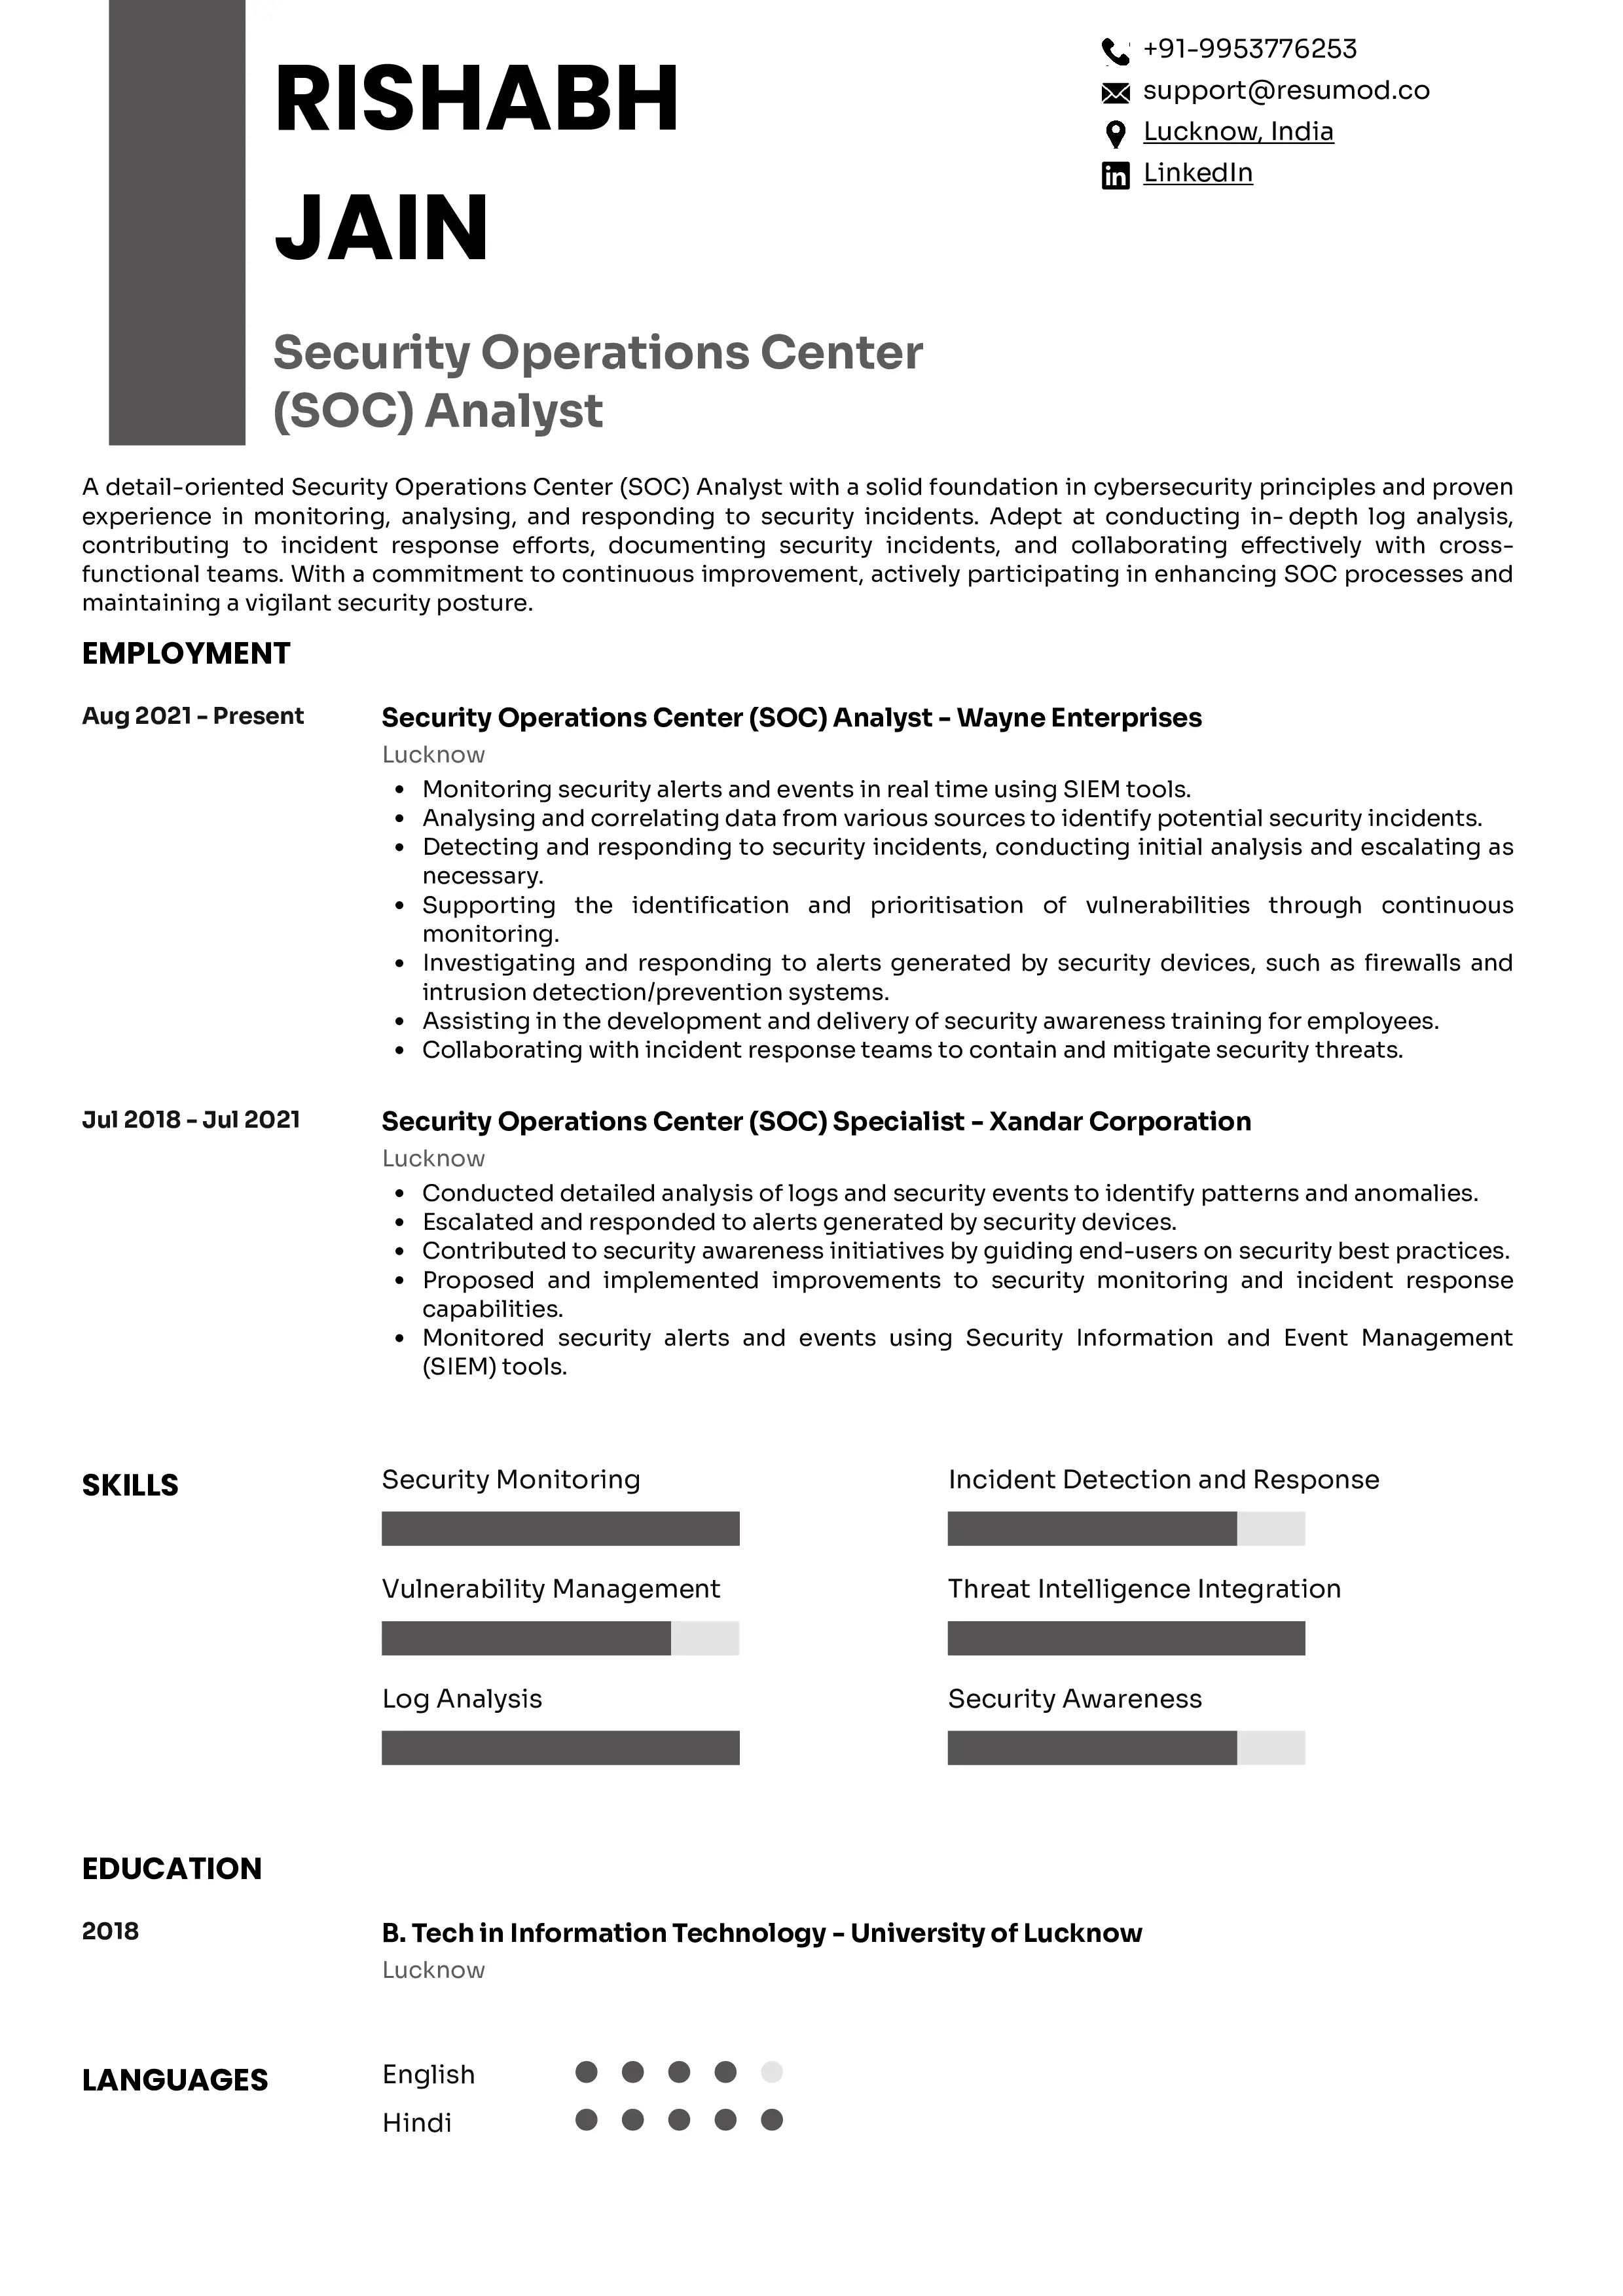 Sample Resume of Security Operations Centre (SOC) Analyst | Free Resume Templates & Samples on Resumod.co